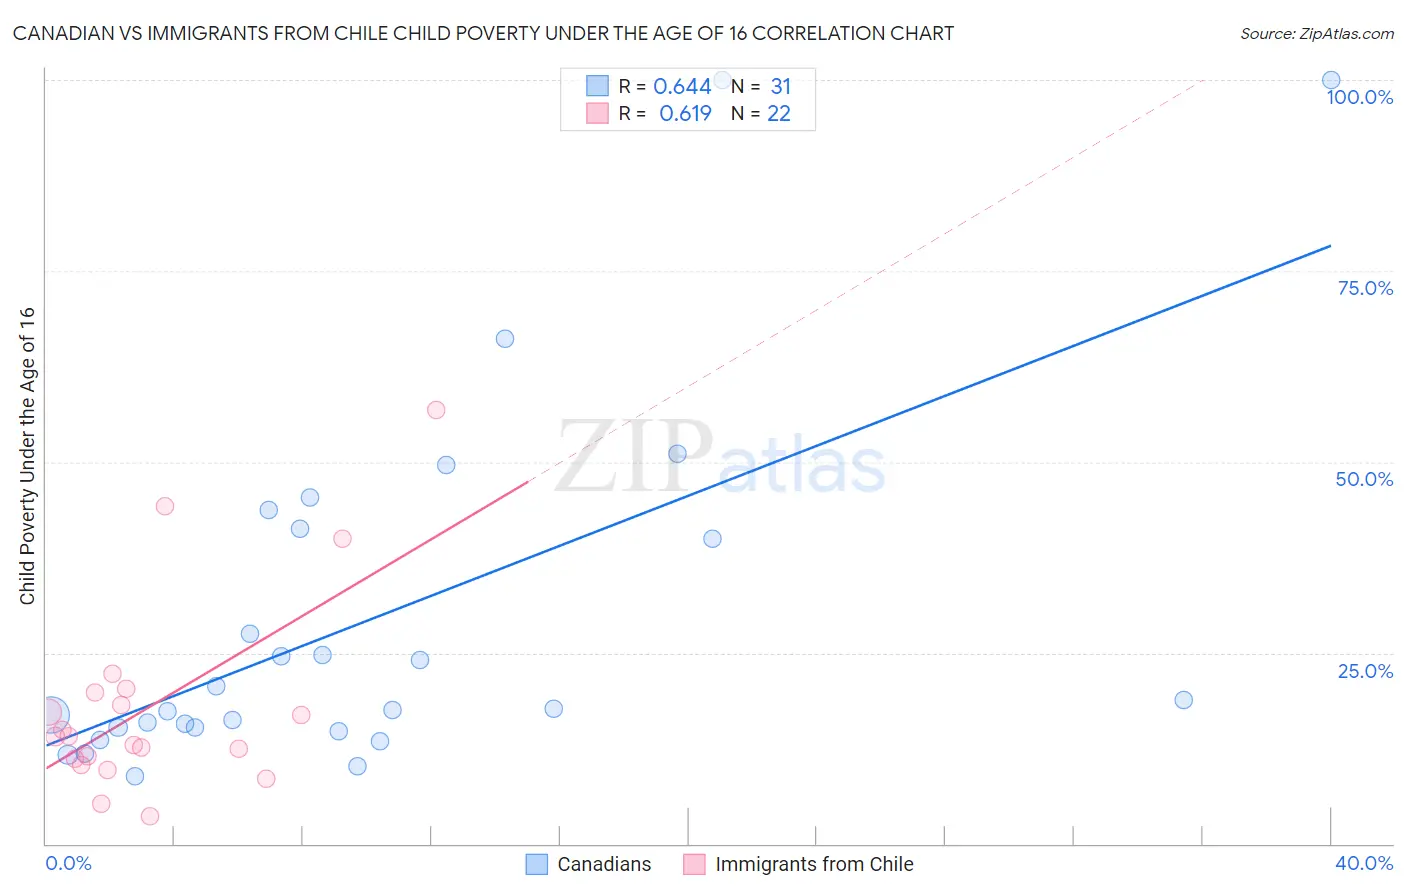 Canadian vs Immigrants from Chile Child Poverty Under the Age of 16